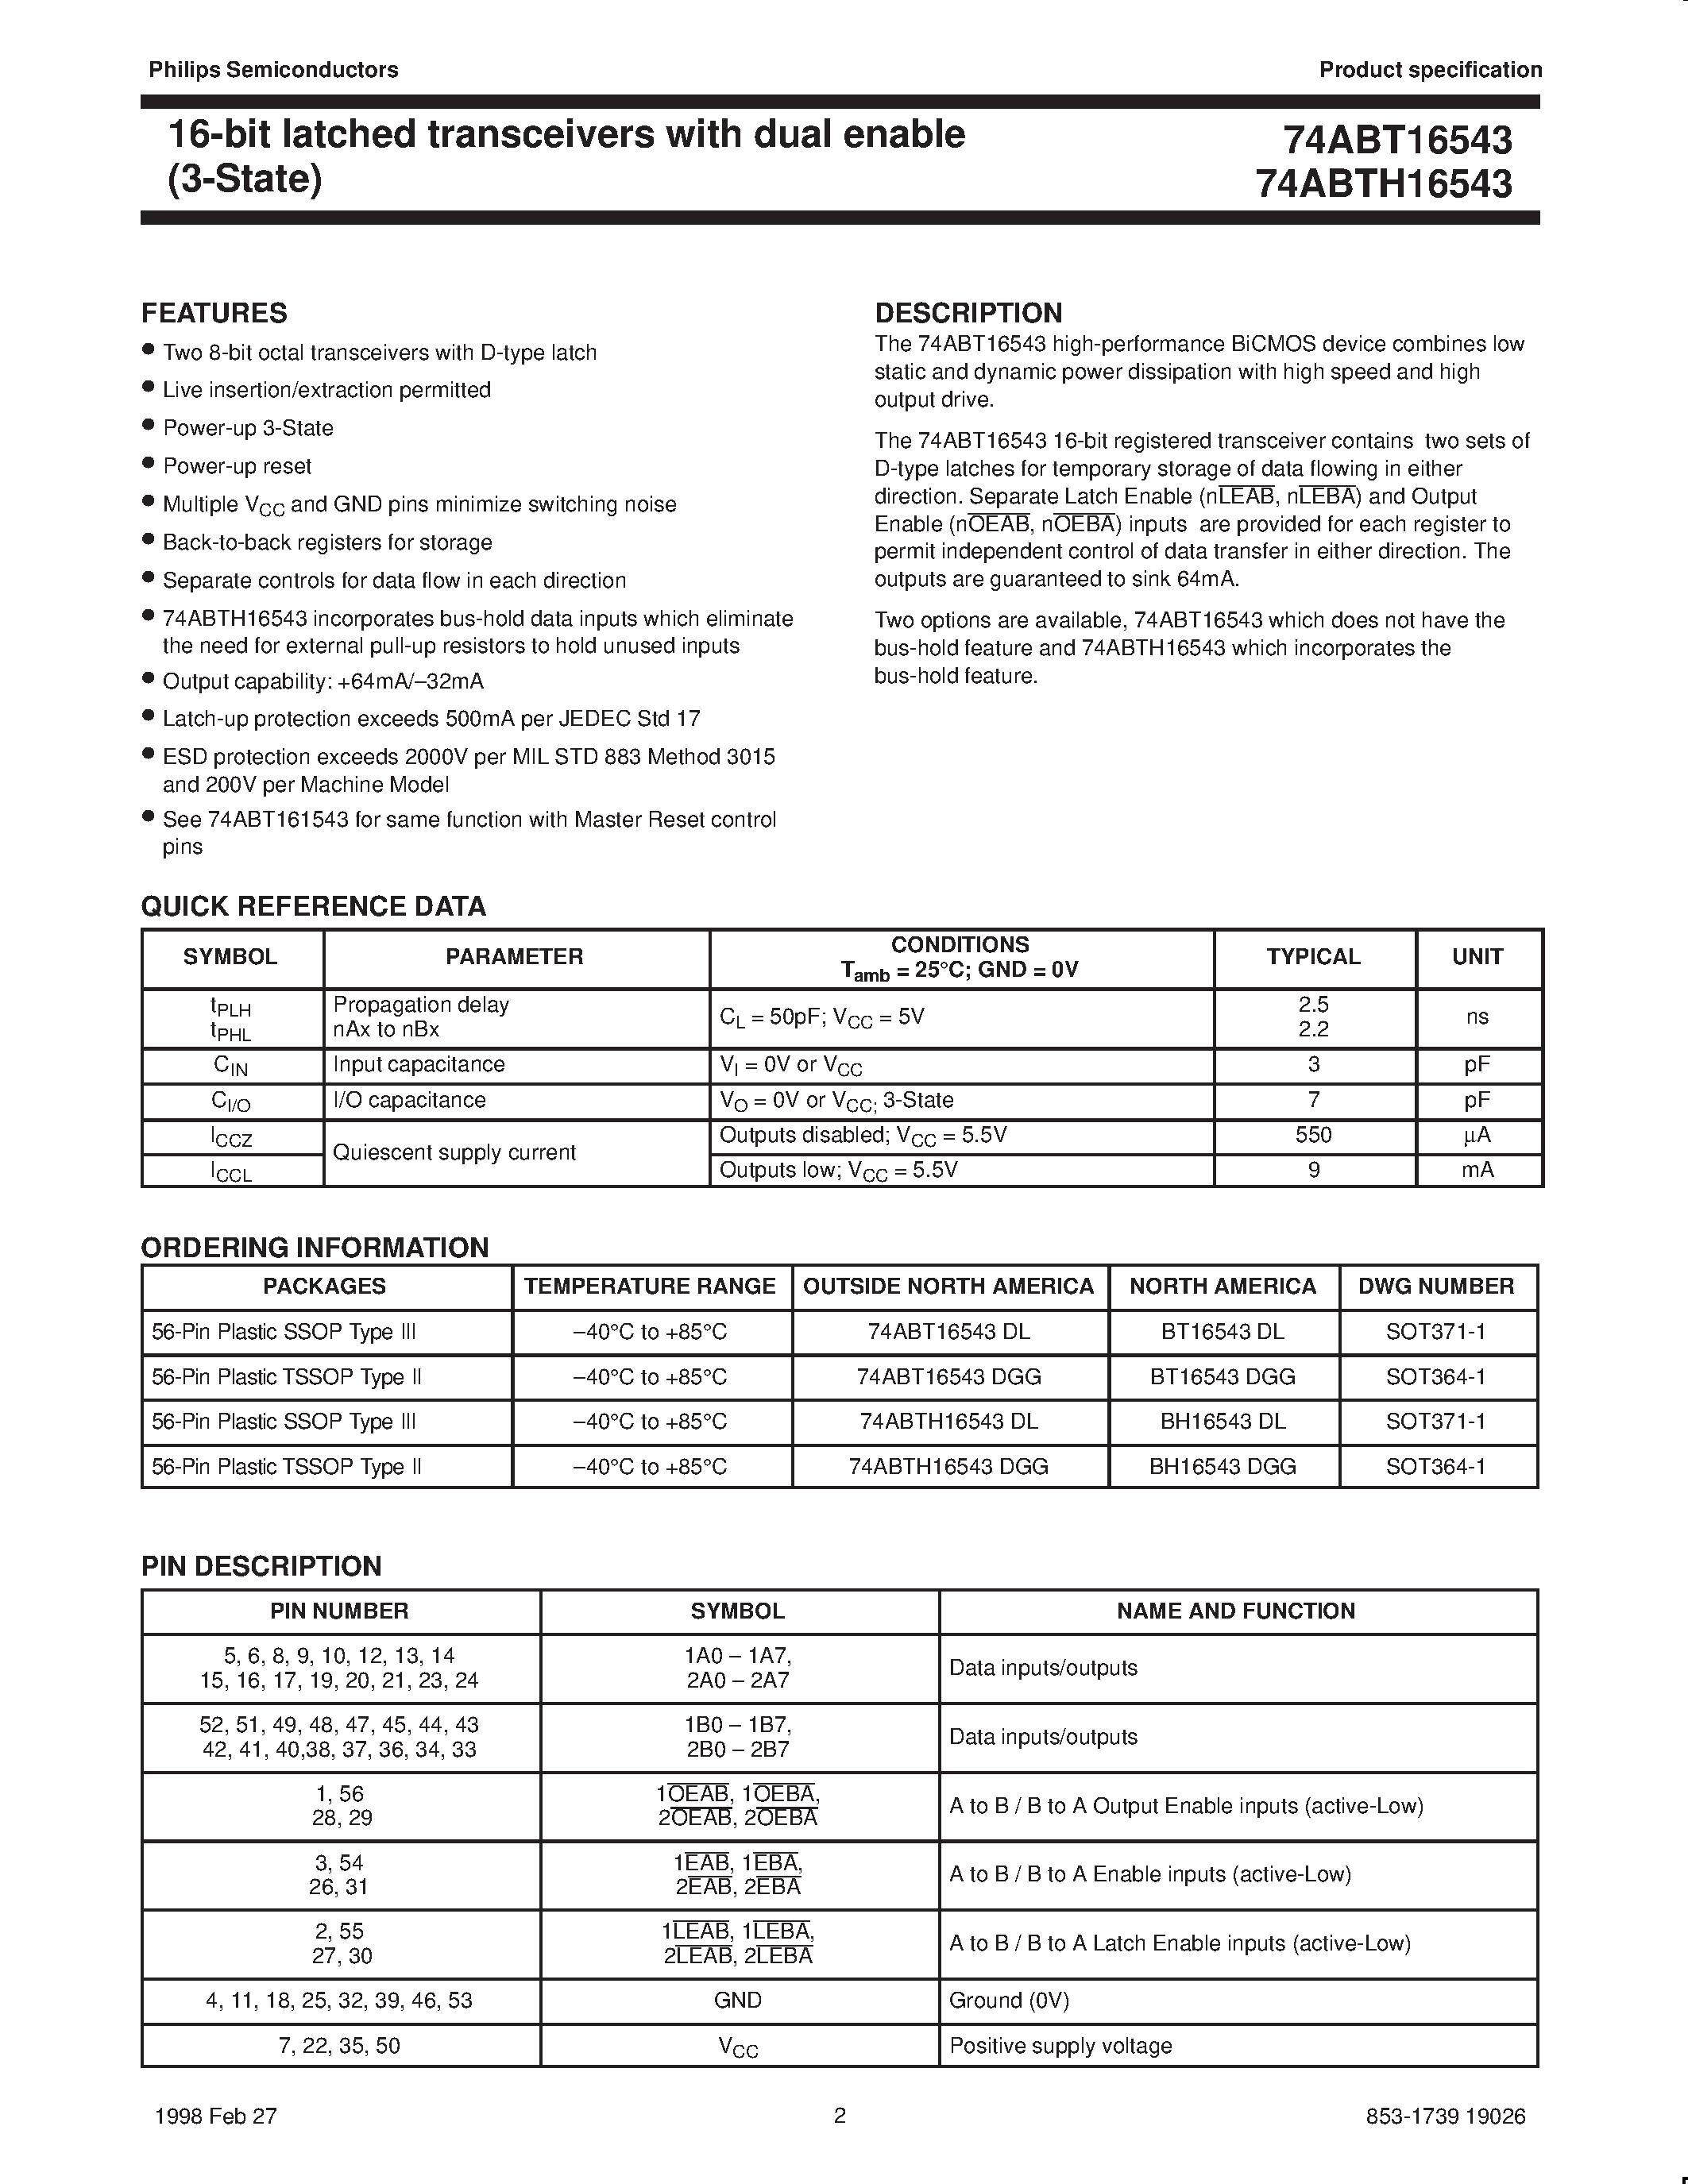 Datasheet 74ABTH16543DGG - 16-bit latched transceivers with dual enable 3-State page 2